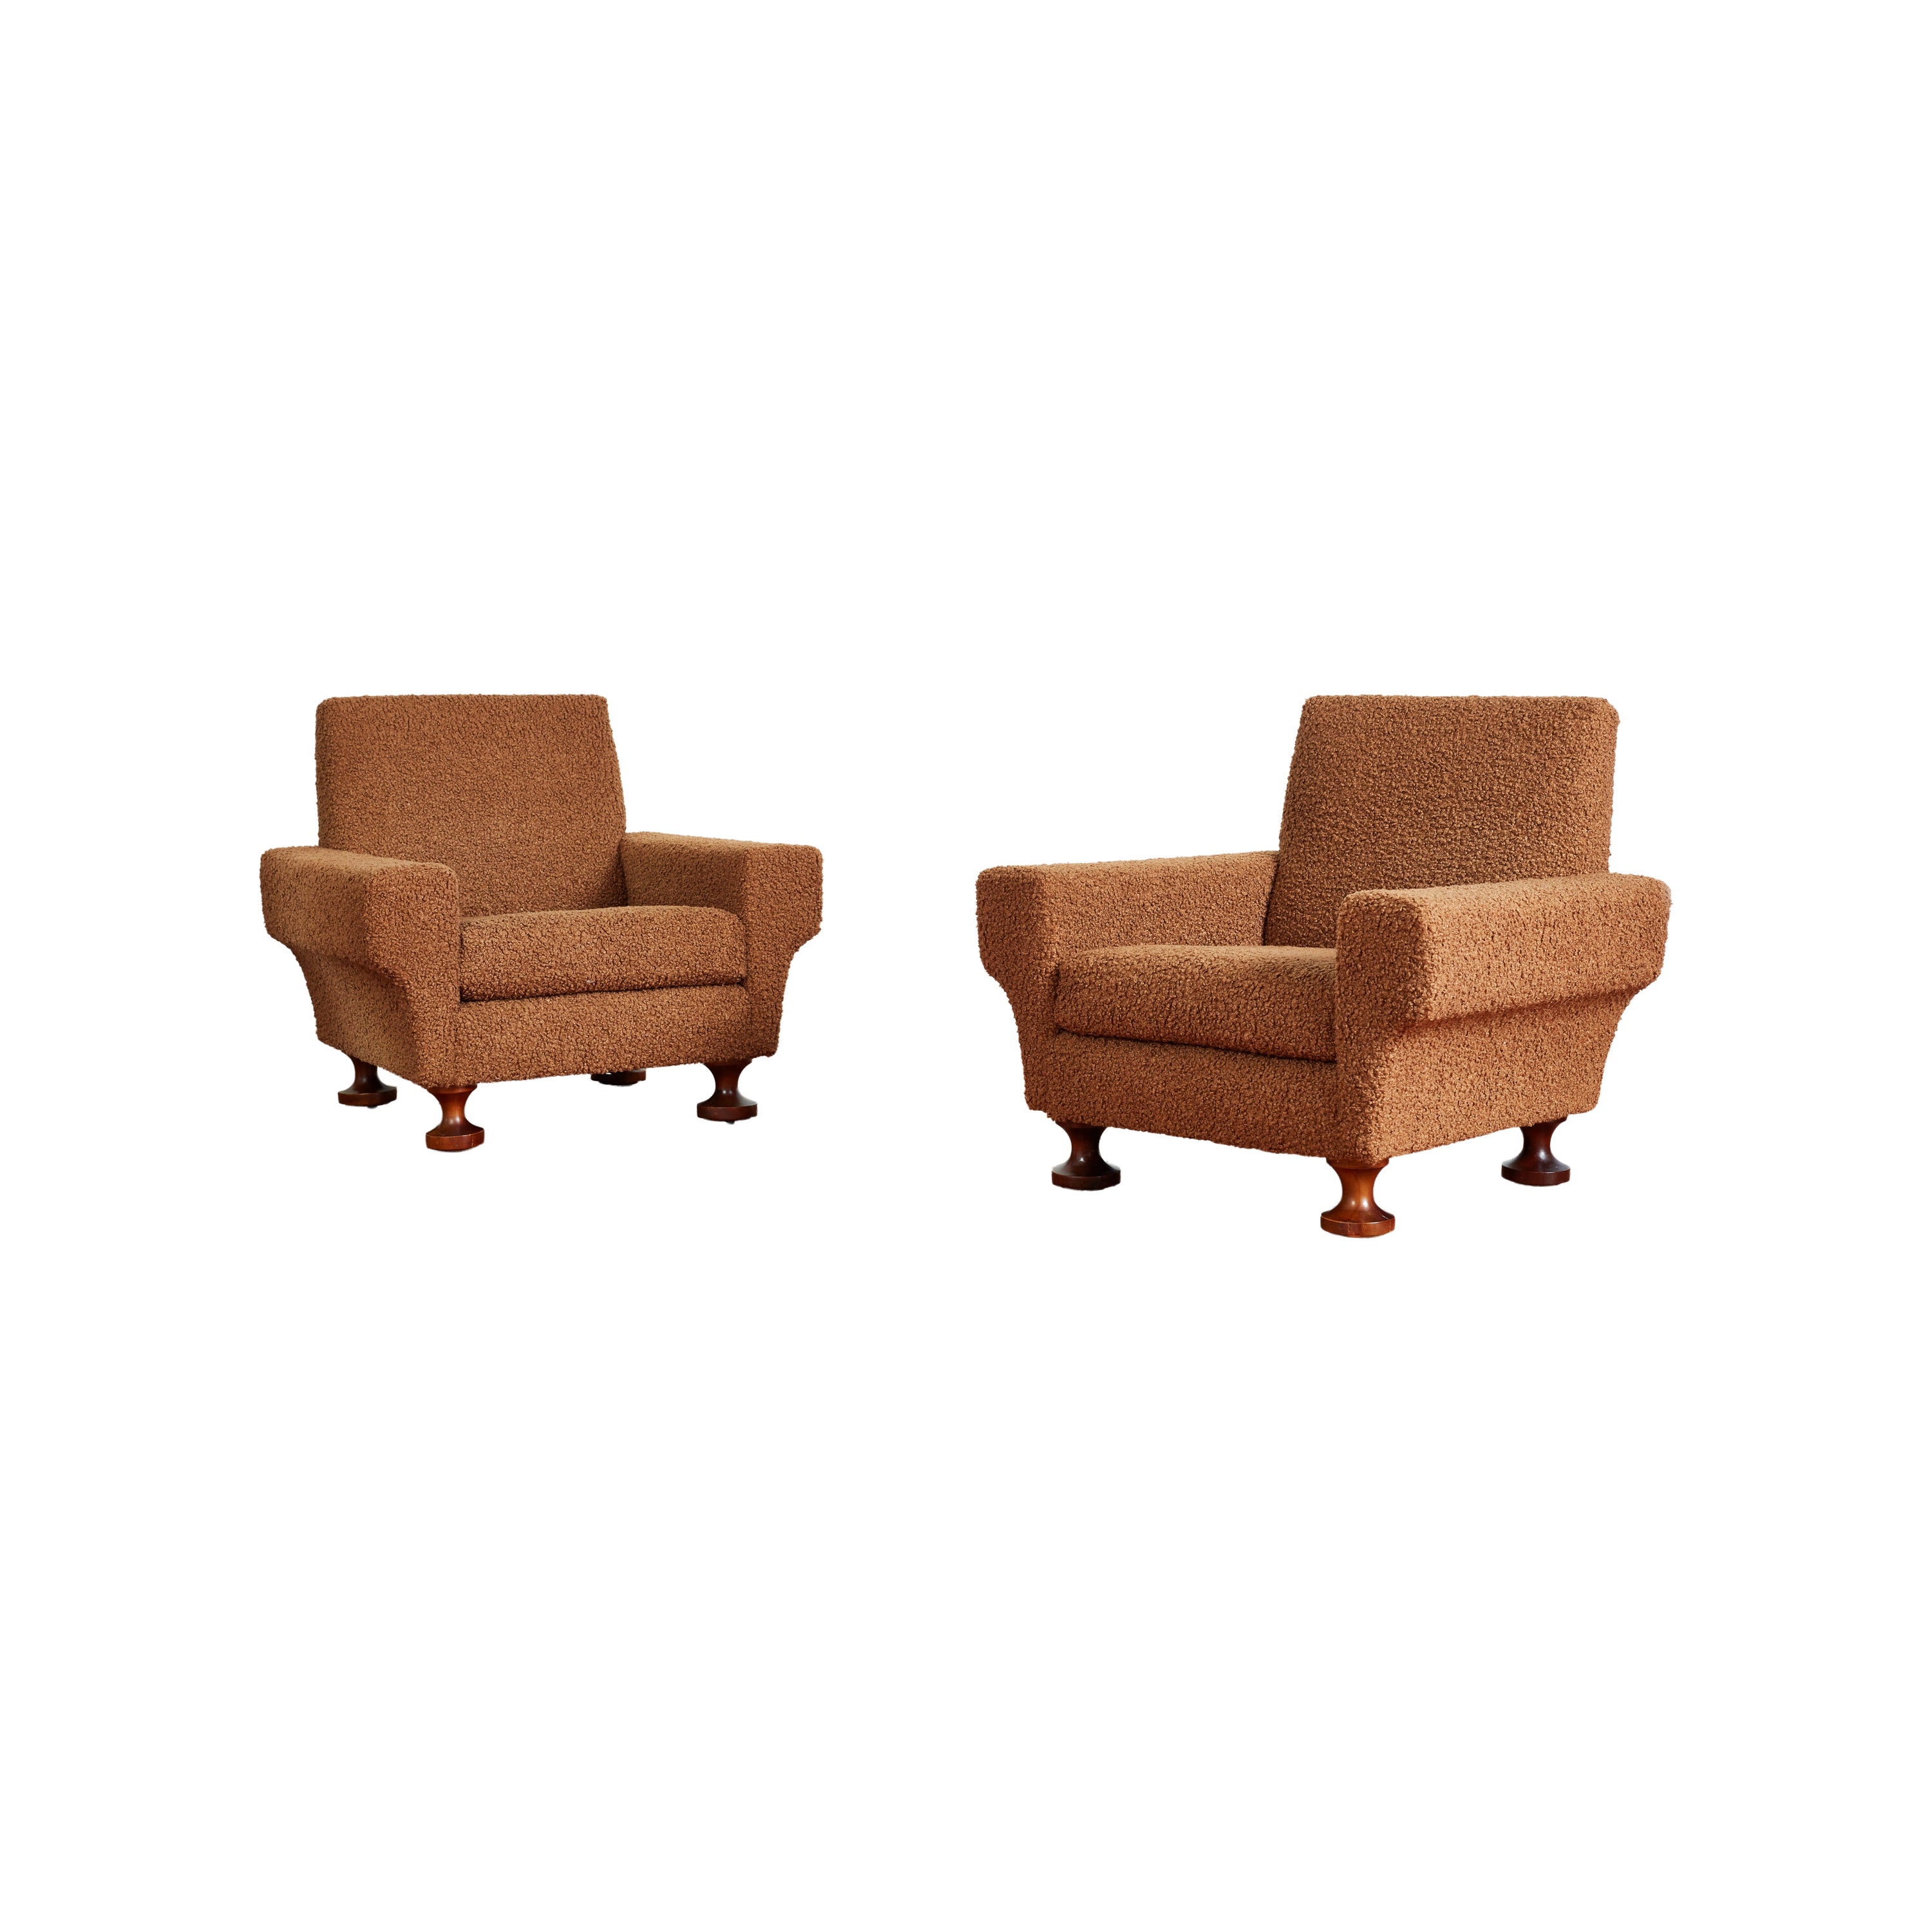 Marco Zanuso Armchairs For Sale at 1stDibs